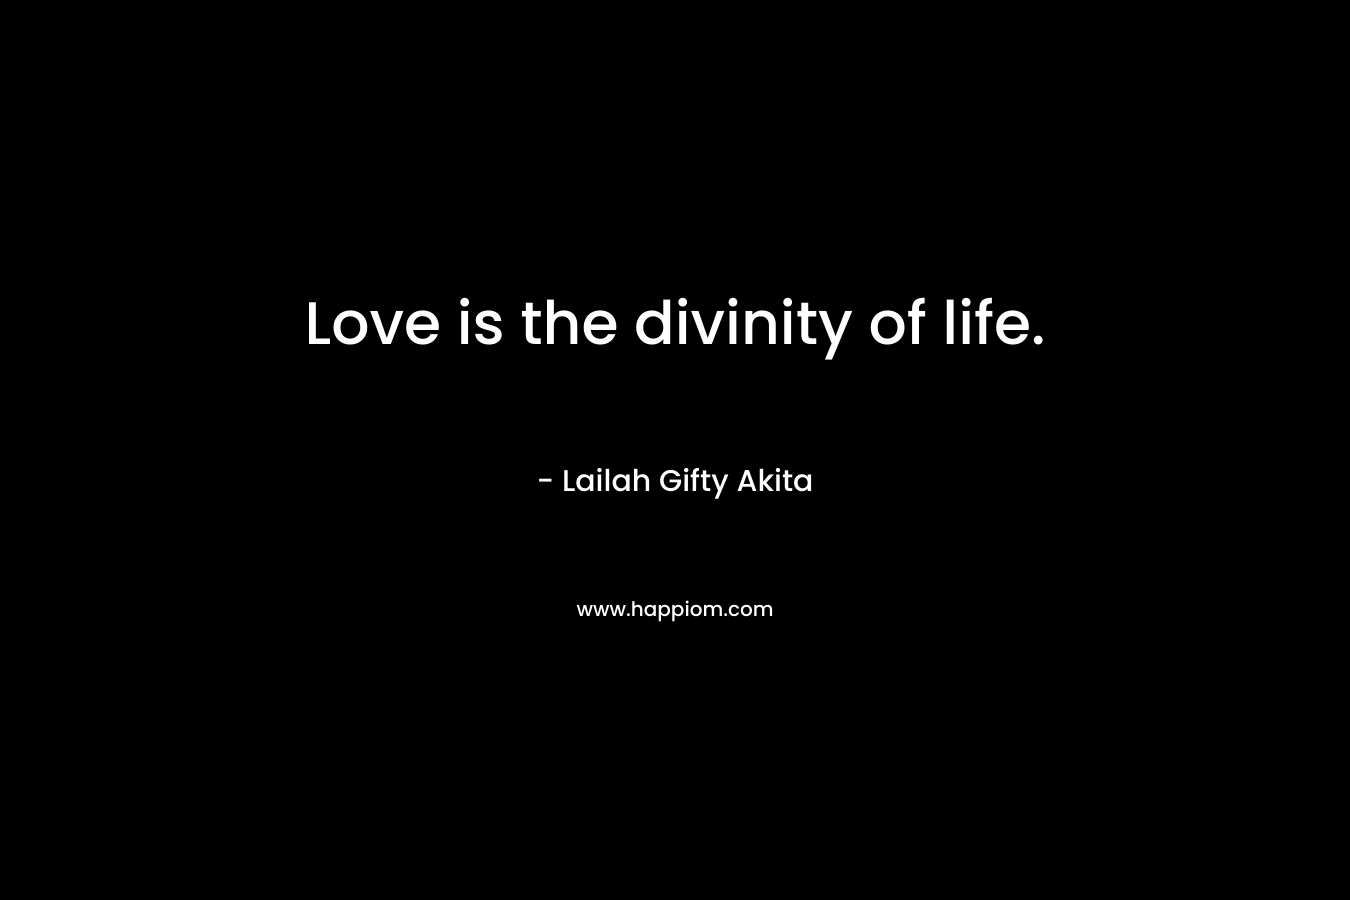 Love is the divinity of life. – Lailah Gifty Akita